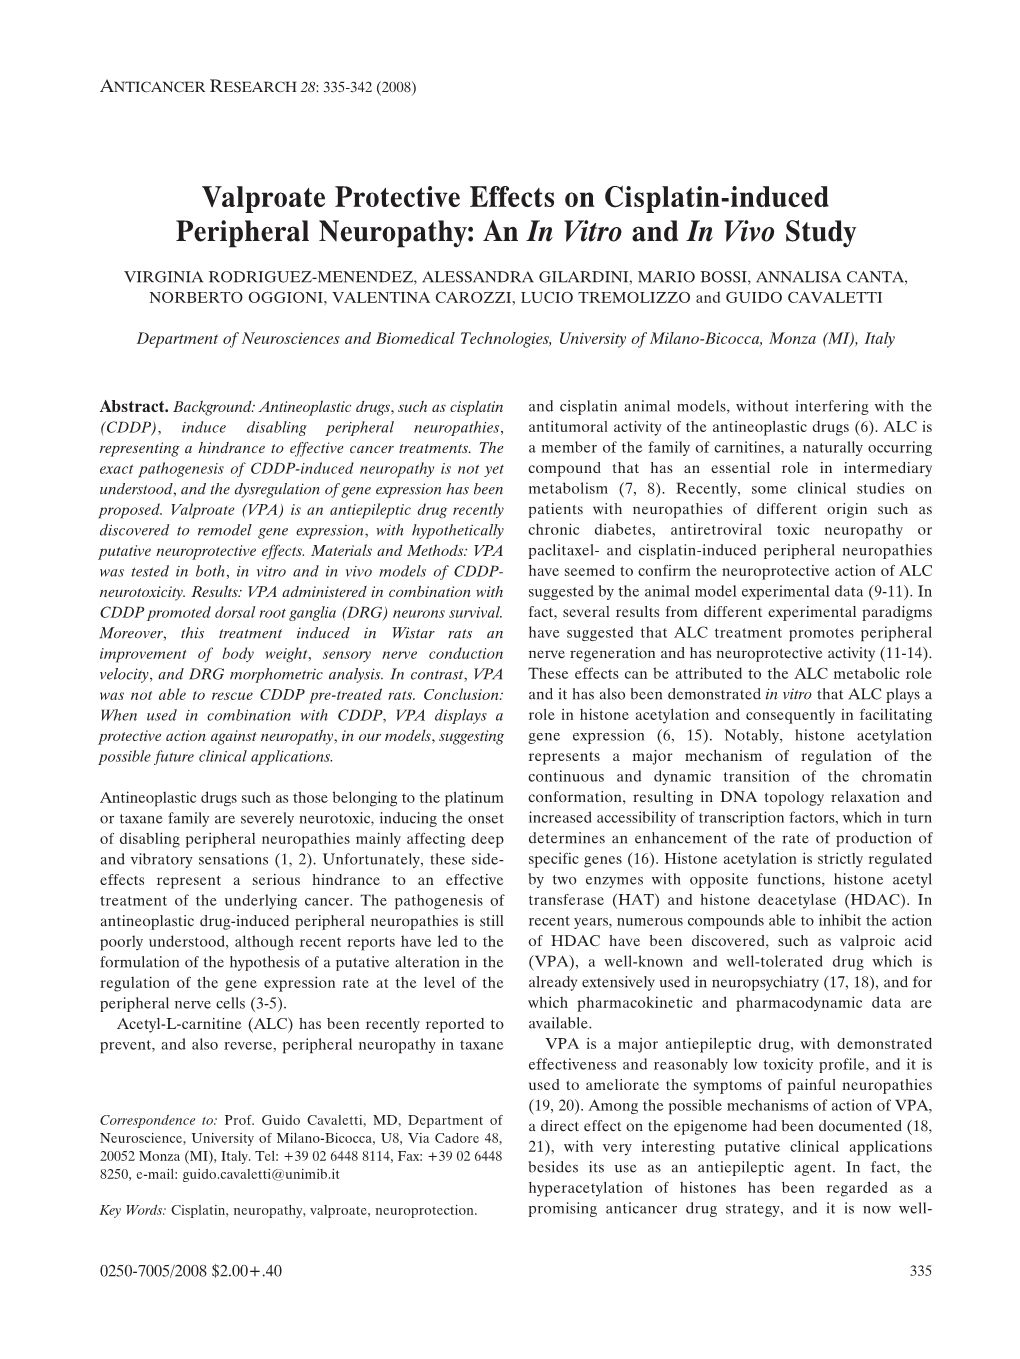 Valproate Protective Effects on Cisplatin-Induced Peripheral Neuropathy: an in Vitro and in Vivo Study